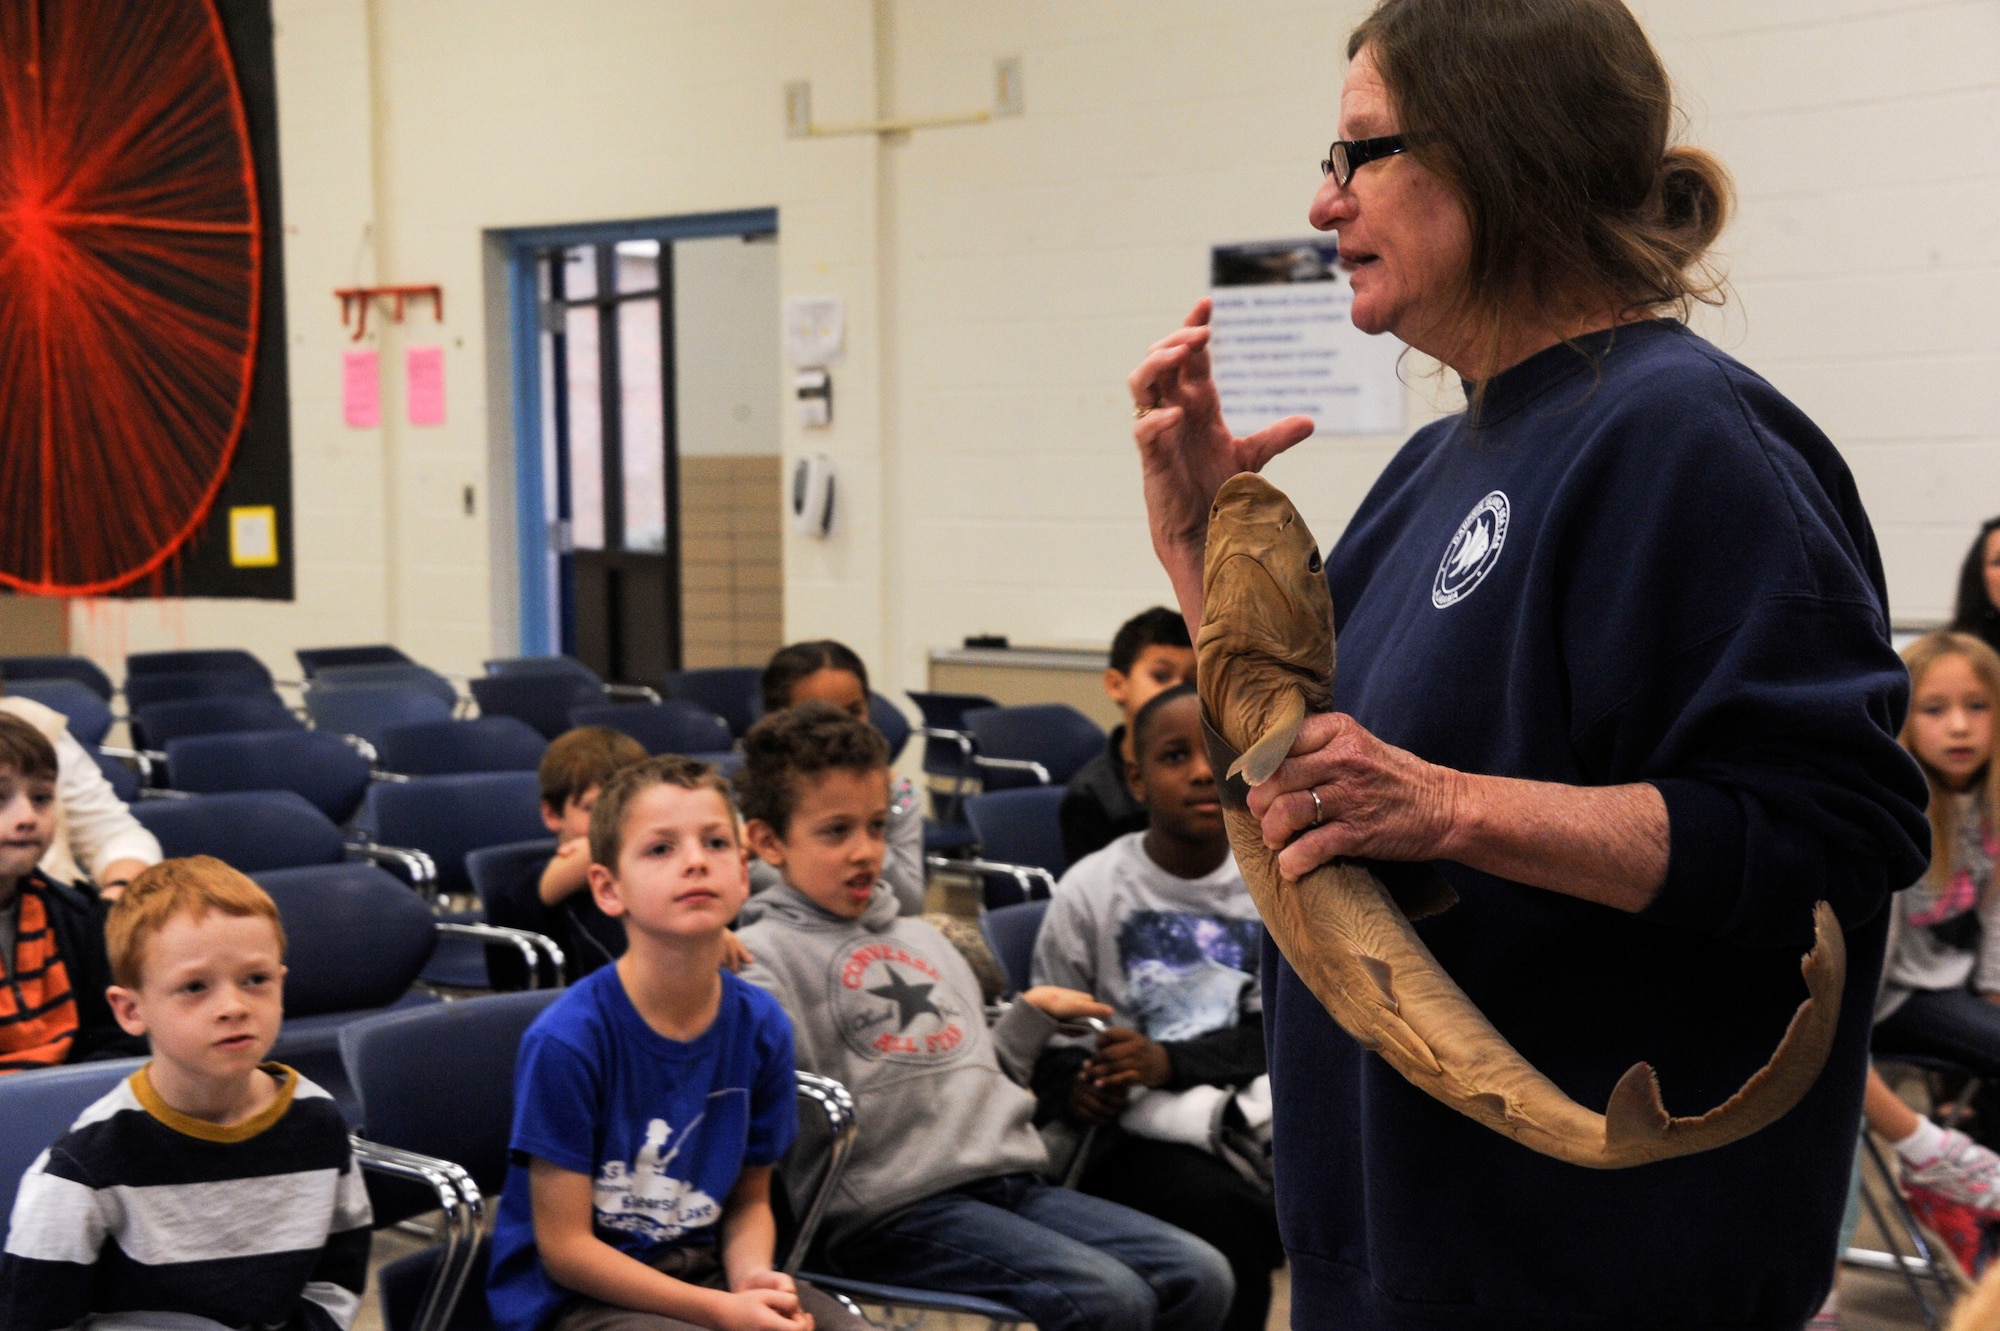 Hazel Wilson, Dauphin Island Sea Lab marine science educator, exhibits a Nurse Shark to a class of second graders during the Dauphin Island Sea Lab’s BayMobile event Jan. 26, 2015, at the Maxwell Elementary/Middle School at Maxwell Air Force Base, Alabama. The Nurse shark is an inshore bottom-dwelling shark found in tropical and subtropical waters and can reach the ten feet in length. (U.S. Air Force photo by Airman 1st Class Alexa Culbert)